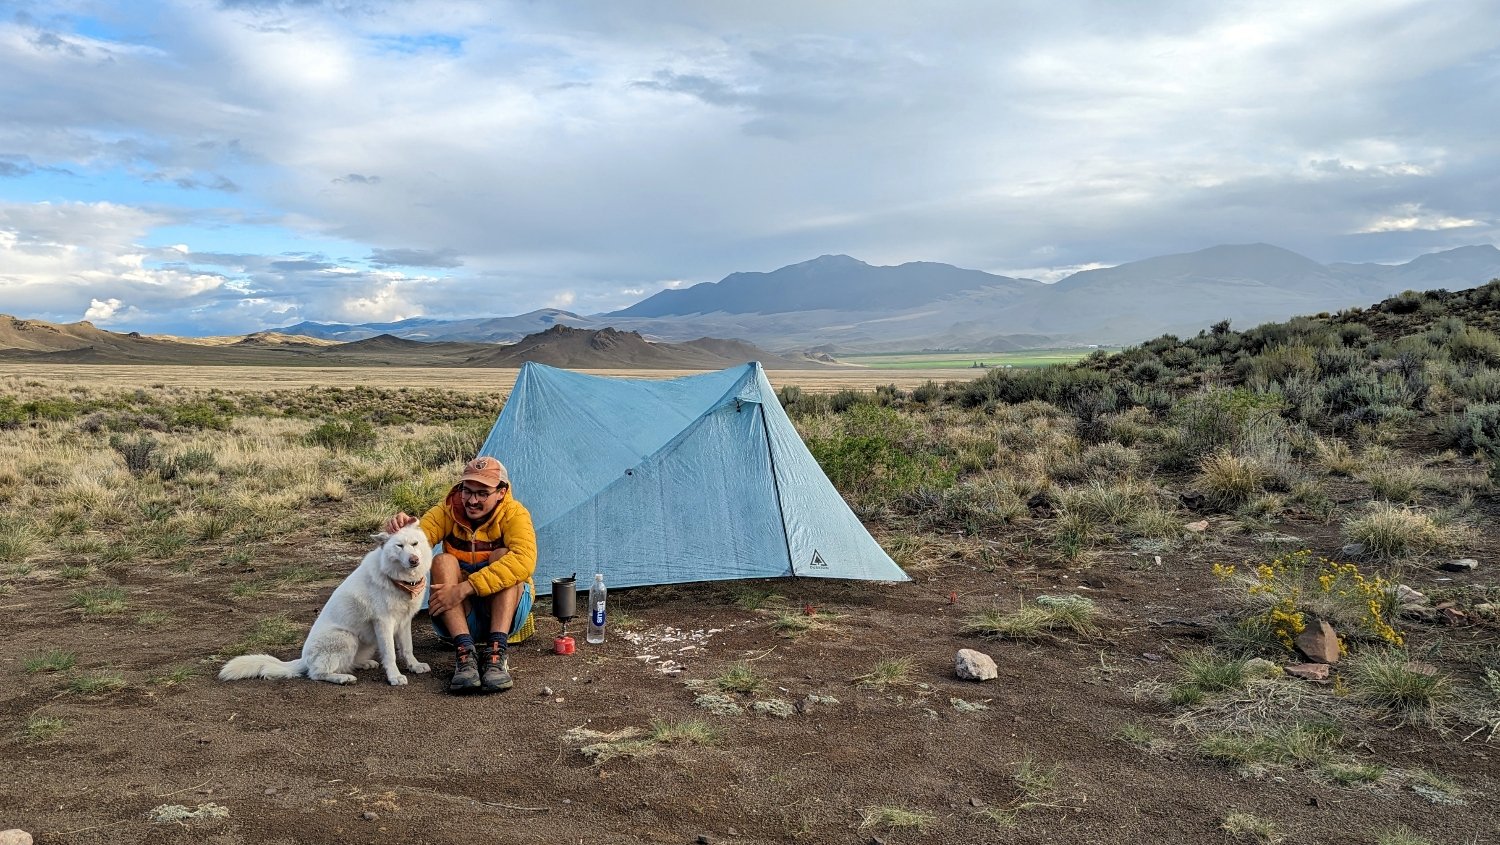 A hiker and a dog sitting outside in a campsite in front of the Durston X-Mid 2 Pro tent. There are mountains in the background with rainclouds overhead